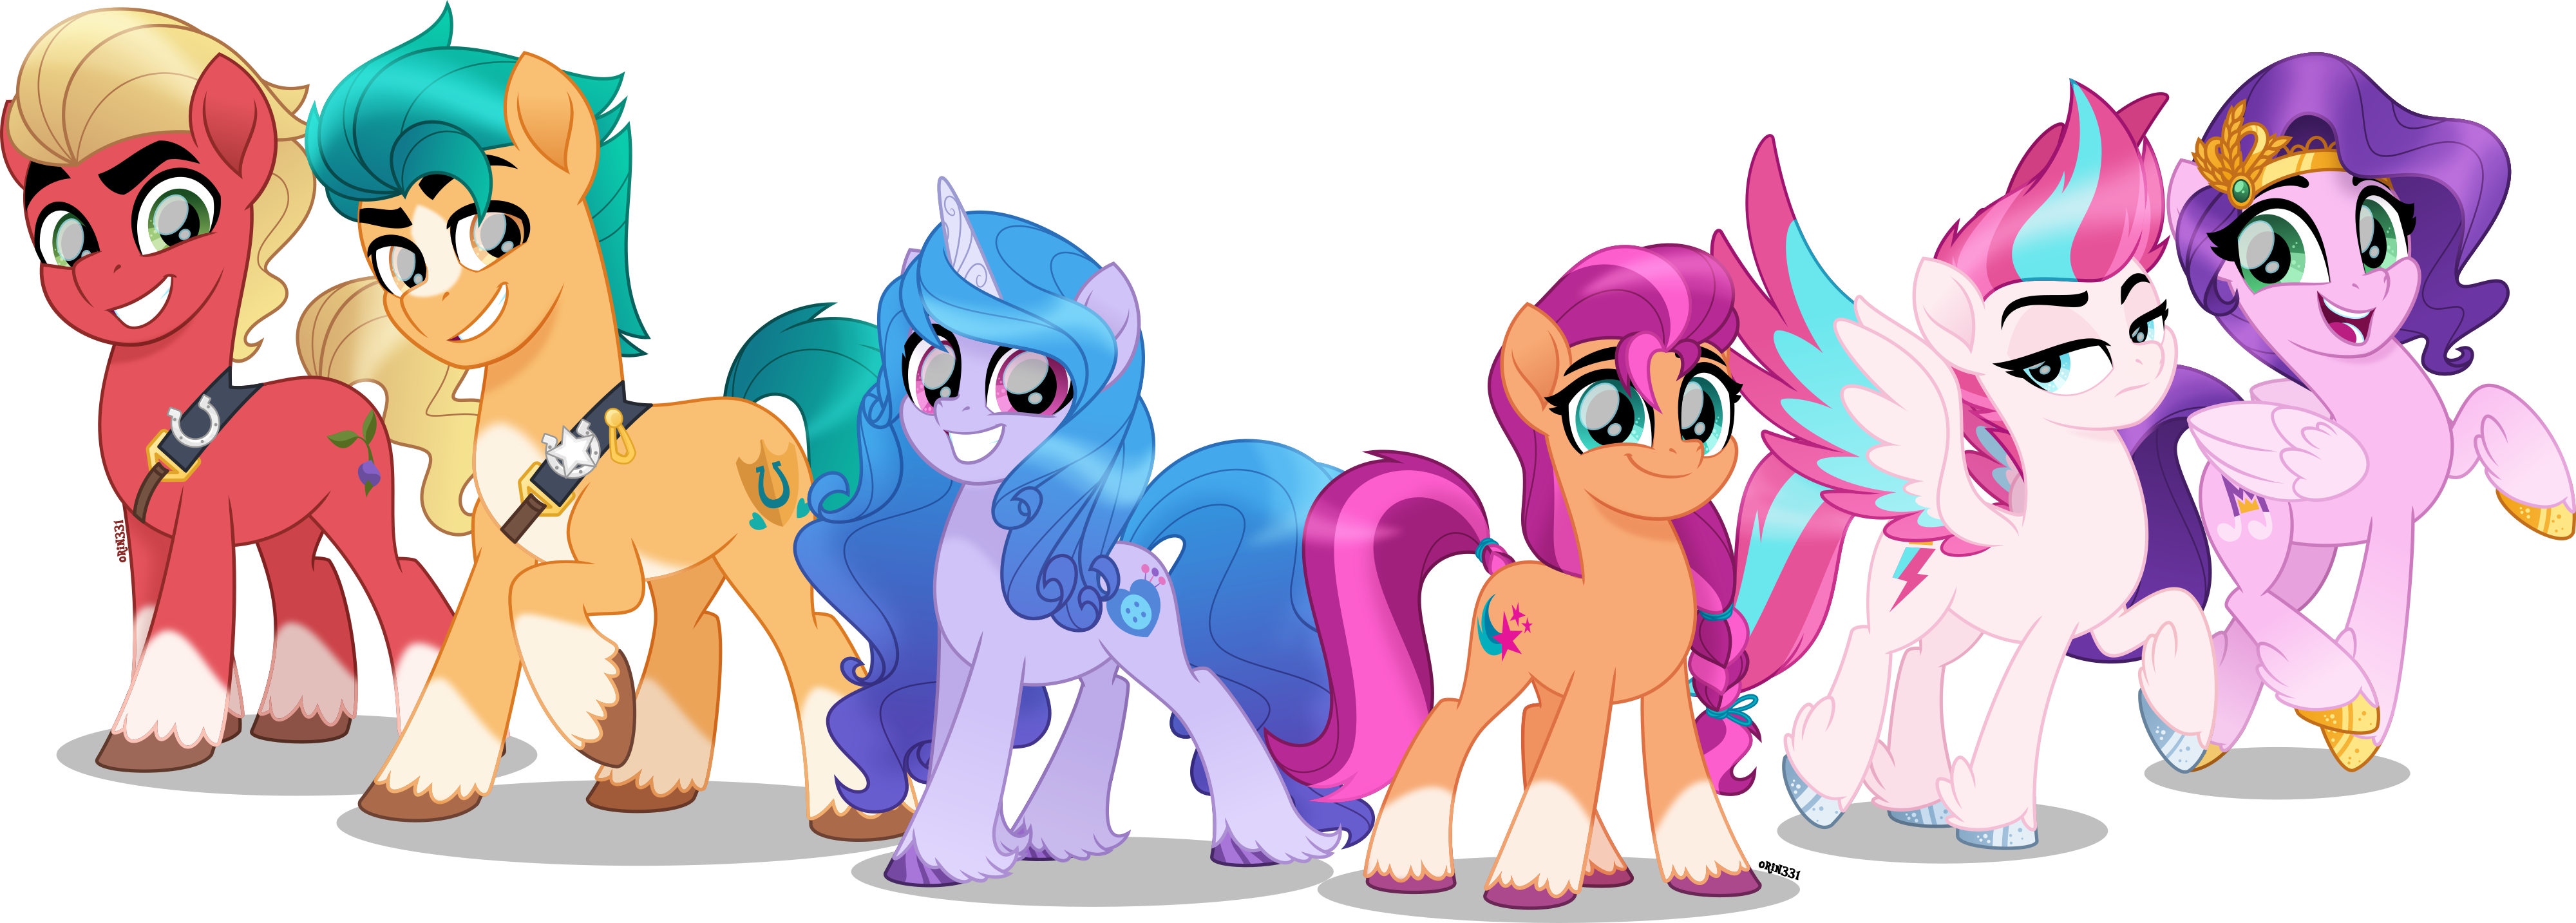 My Little Pony Hd Movie 2021 Wallpapers